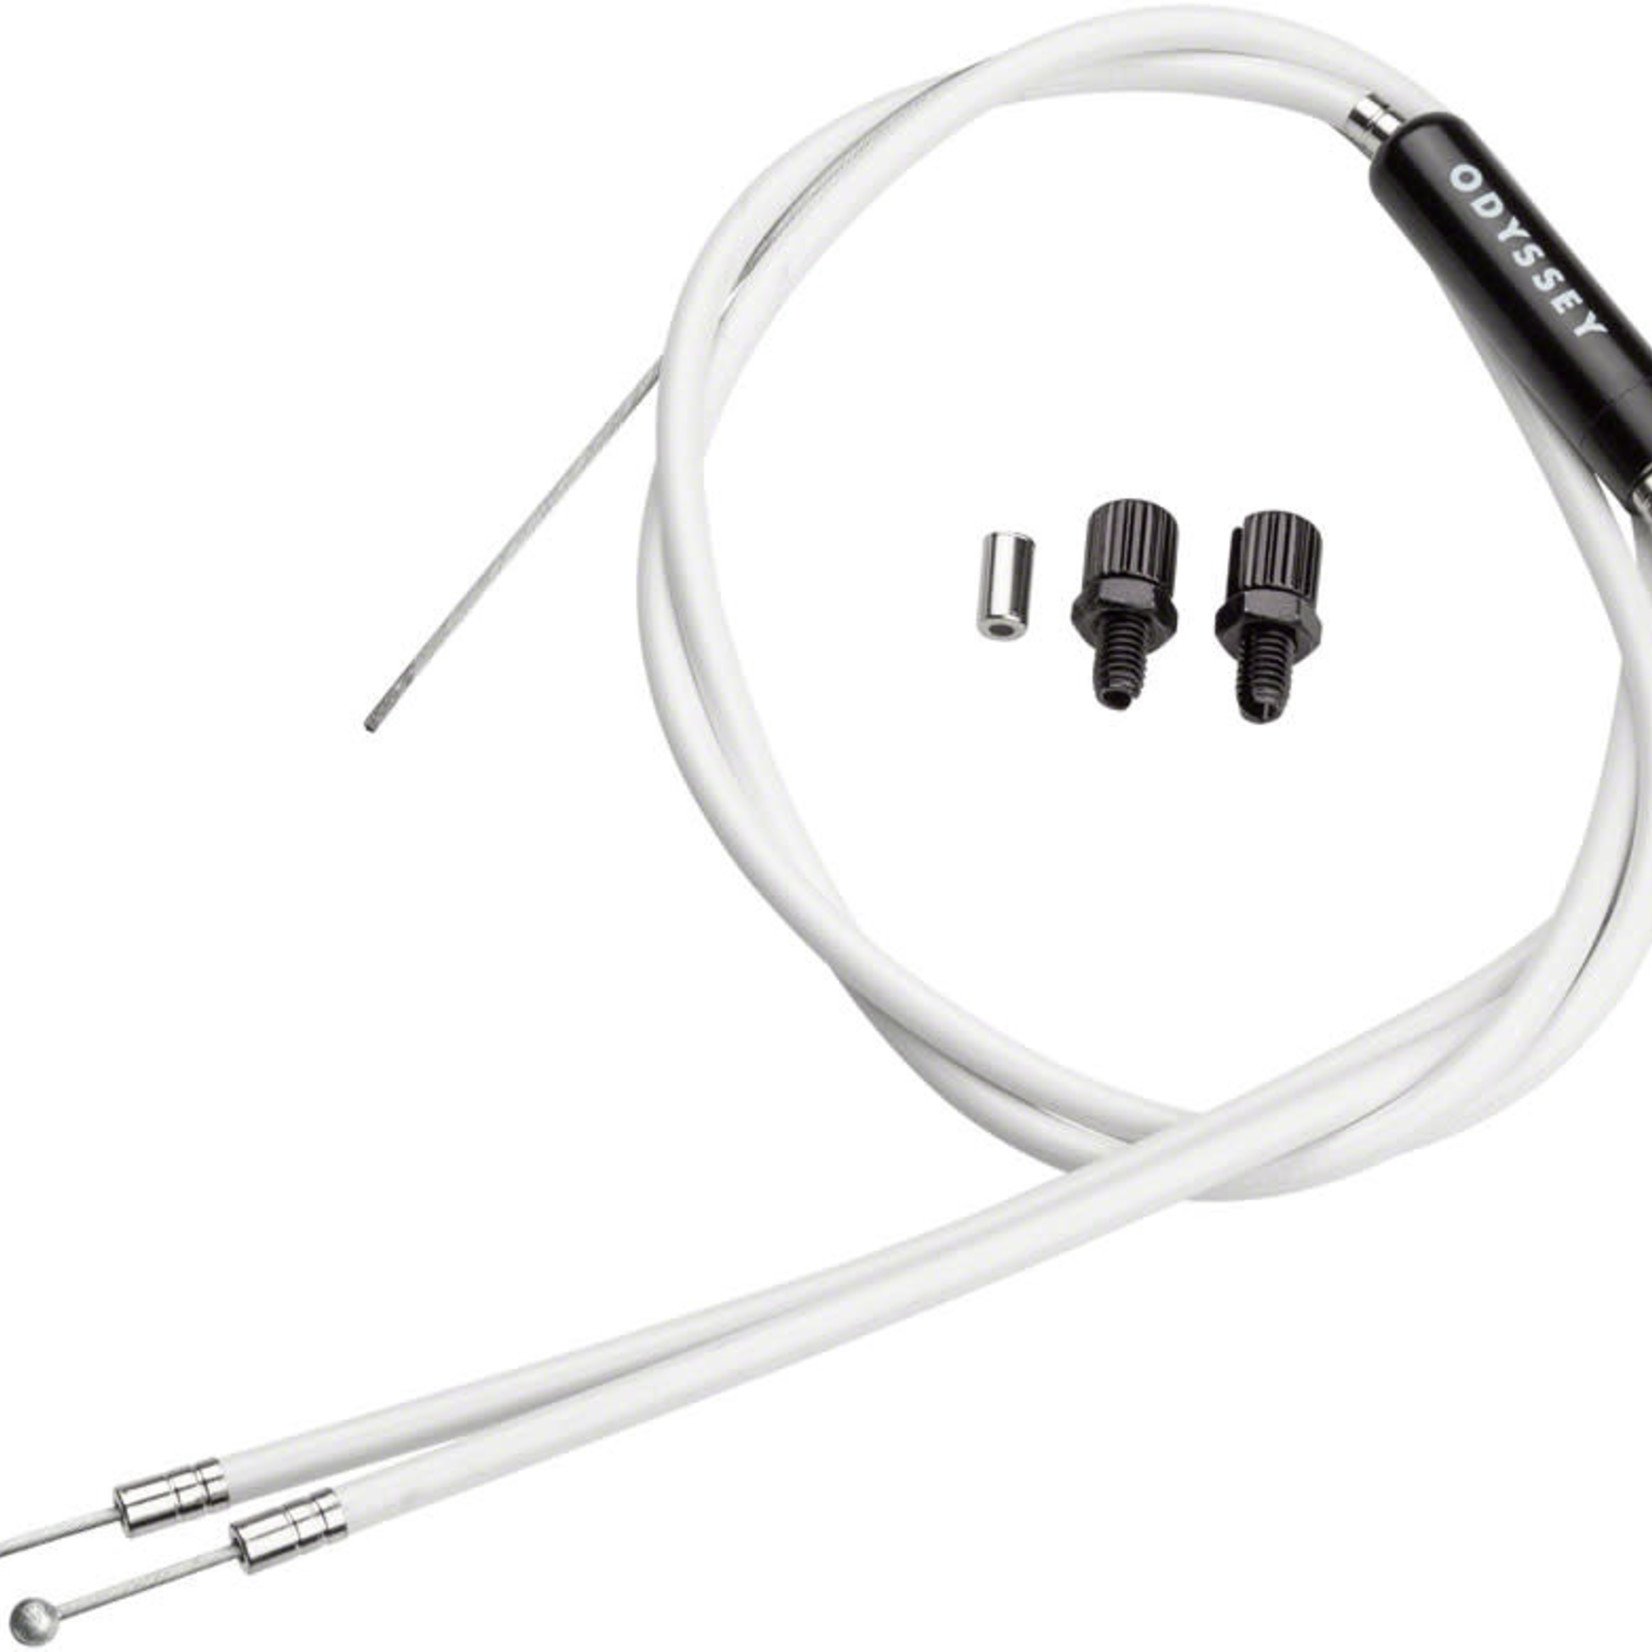 ODYSSEY Odyssey G3 Lower Gyro Cable - Universal, White